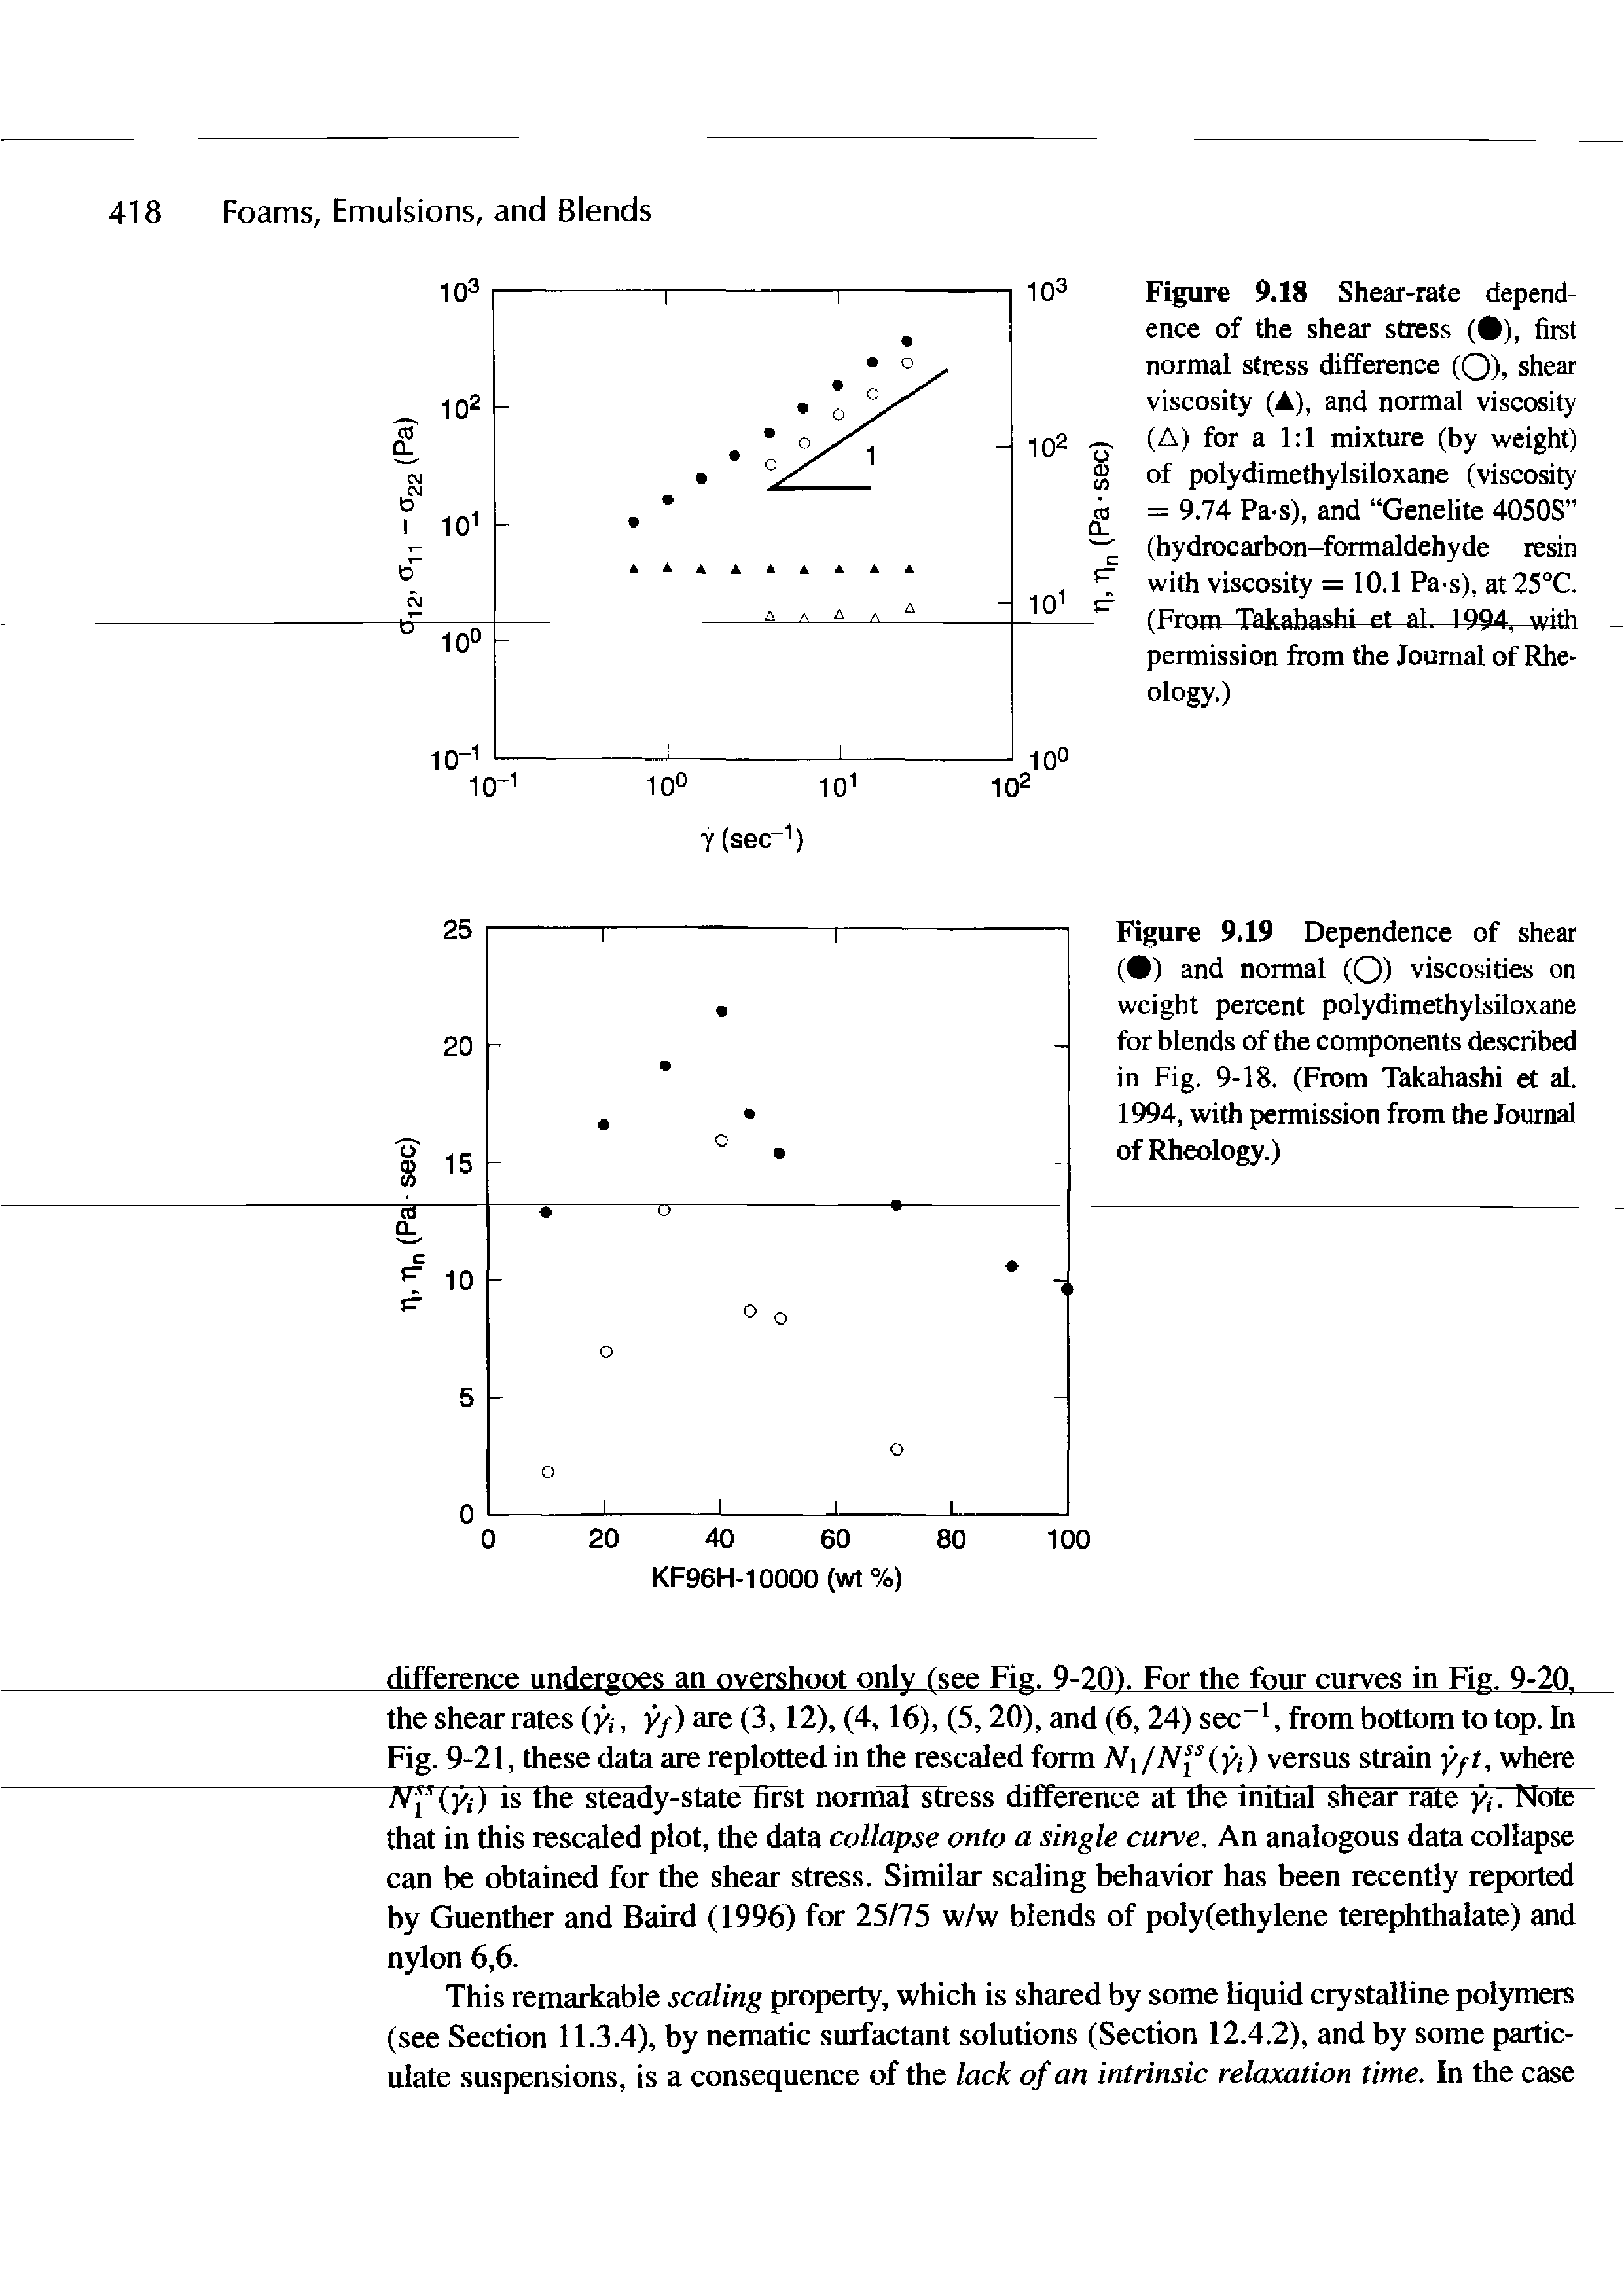 Figure 9.18 Shear-rate dependence of the shear stress ( ), first normal stress difference (Q), shear viscosity (A), and normal viscosity (A) for a 1 1 mixture (by weight) of polydimethylsiloxane (viscosity = 9.74 Pa-s), and Genelite 4050S (hydrocarbon-formaldehyde resin with viscosity =10.1 Pa-s), at25°C. (From Takahashi et al. 1994, with permission ftom the Journal of Rheology.)...